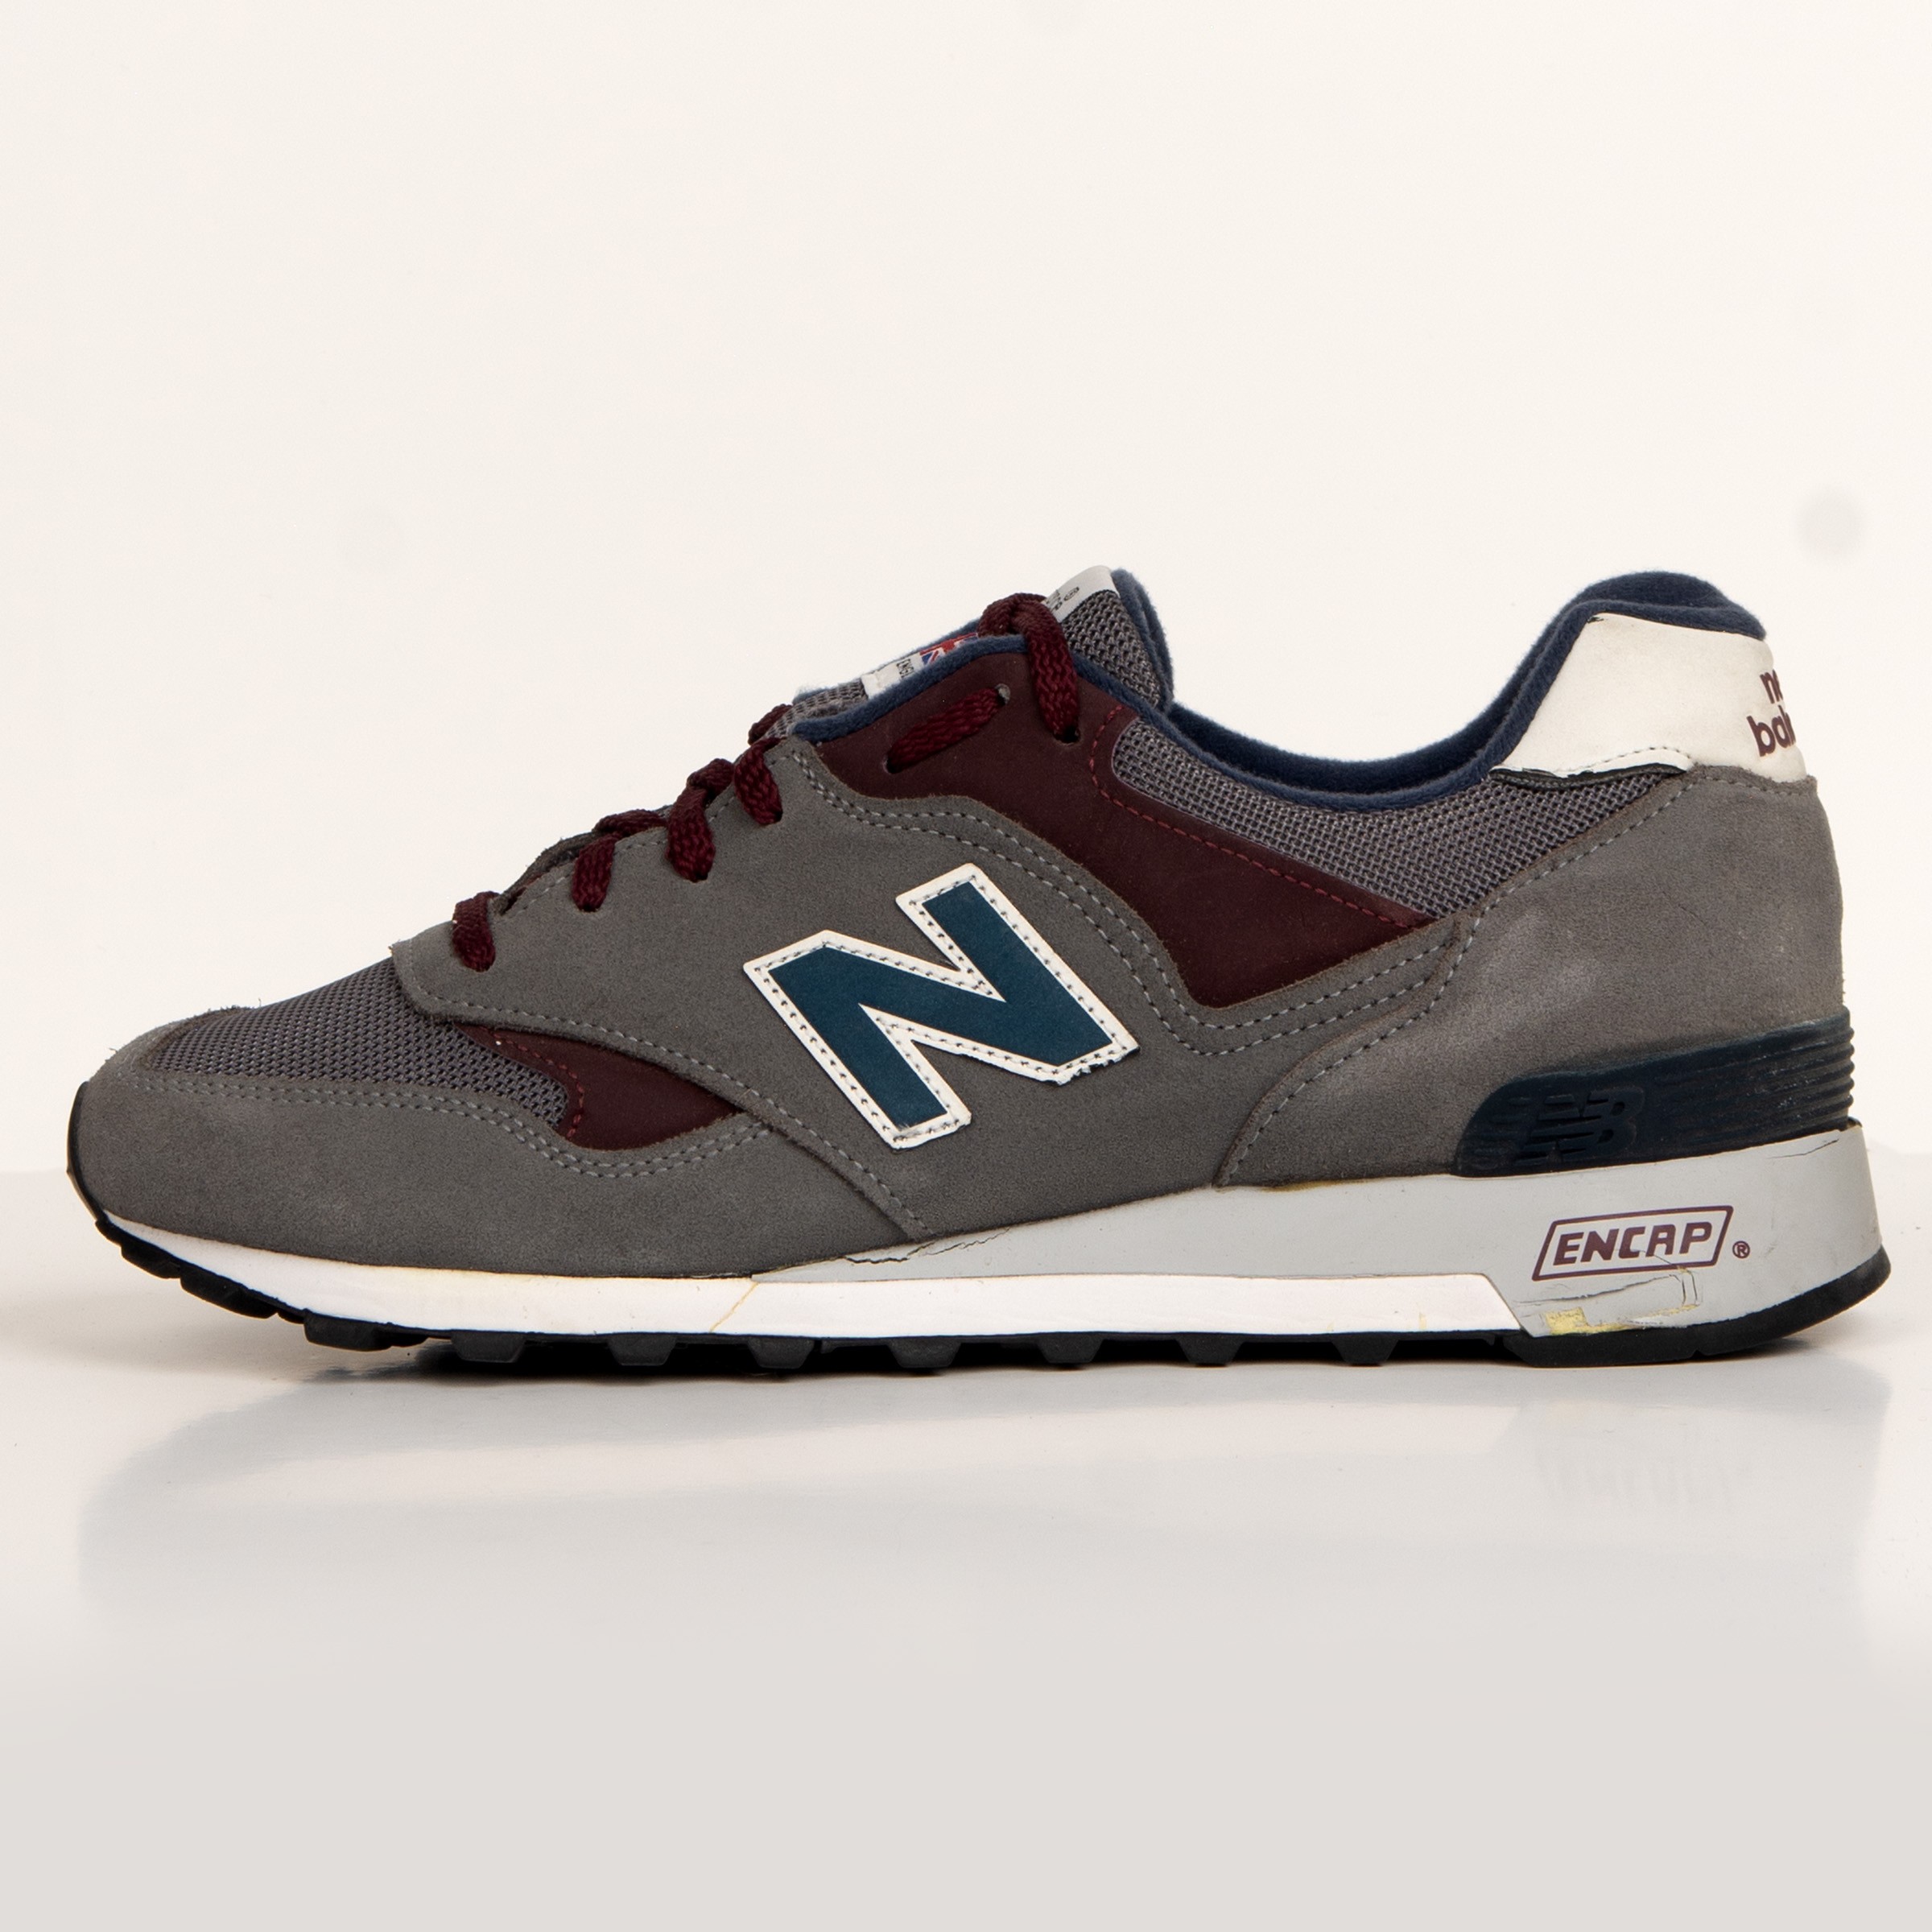 RE-POCKETS NEW BALANCE TRAINERS 577 GREY